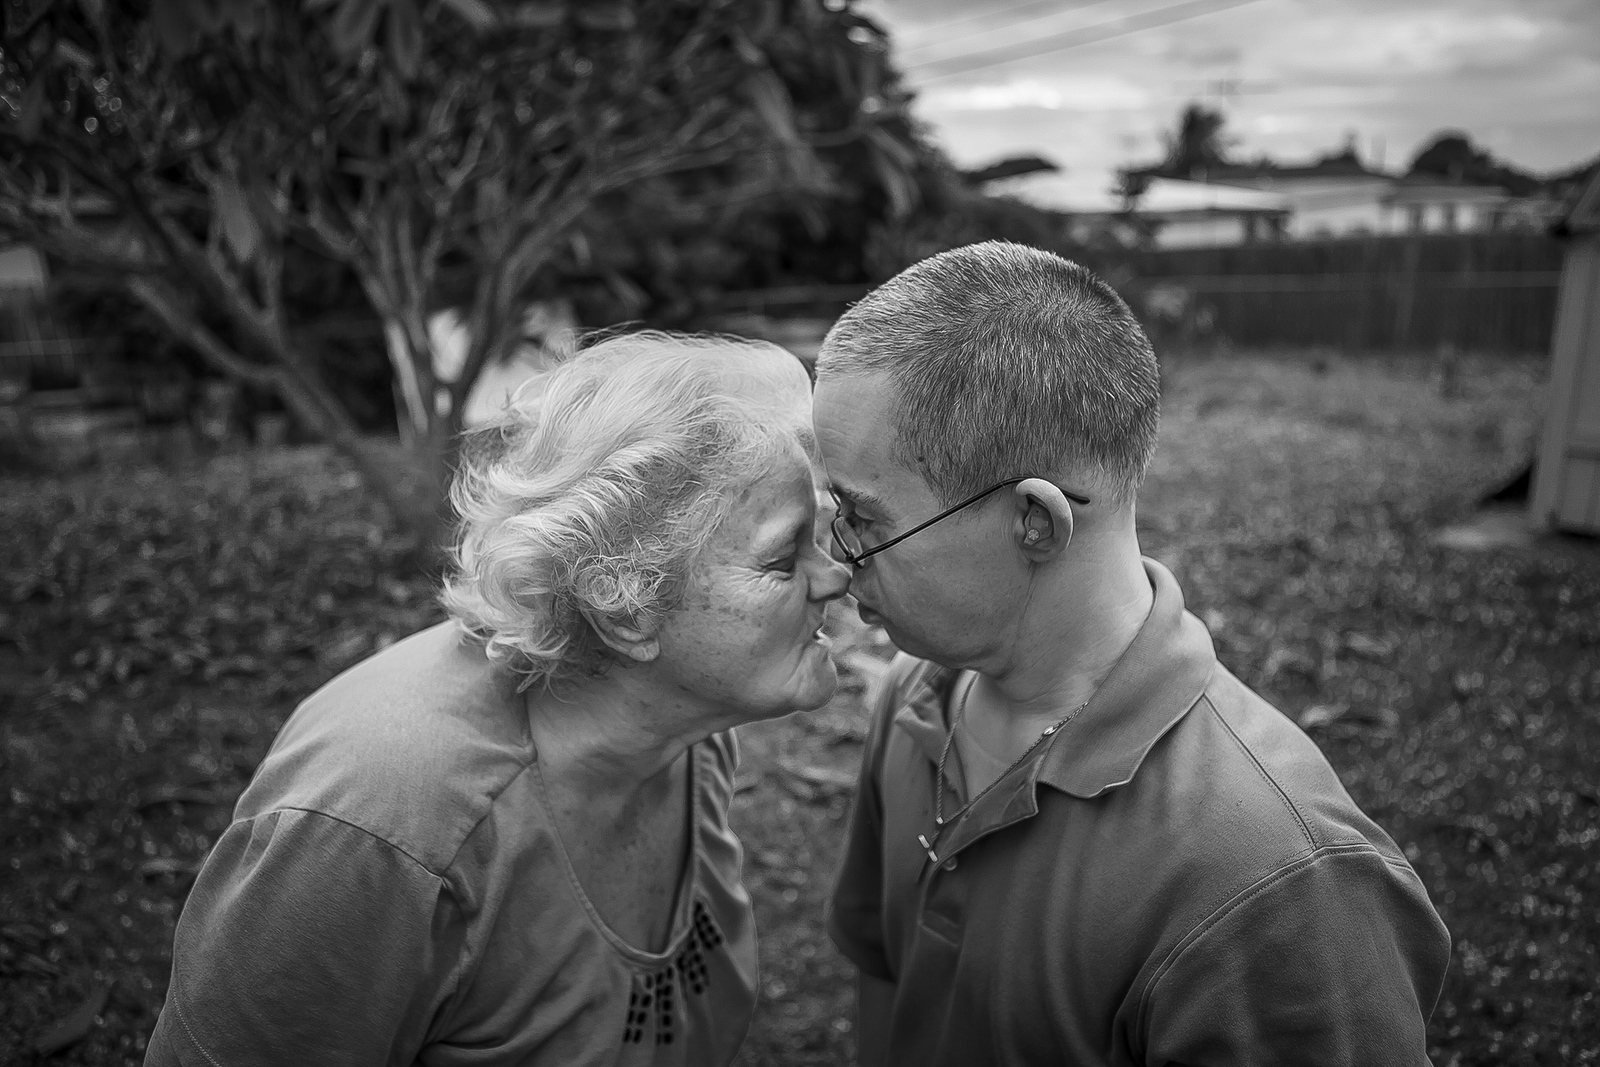  Wanna Tebby, 81,&nbsp;jokes around with her nephew Raymond Hommel, 49,&nbsp;in the backyard of their house. Wanna has taken complete care of Raymond, who has Down syndrome, since he was 14 years old. Wanna worries about both of them needing addition